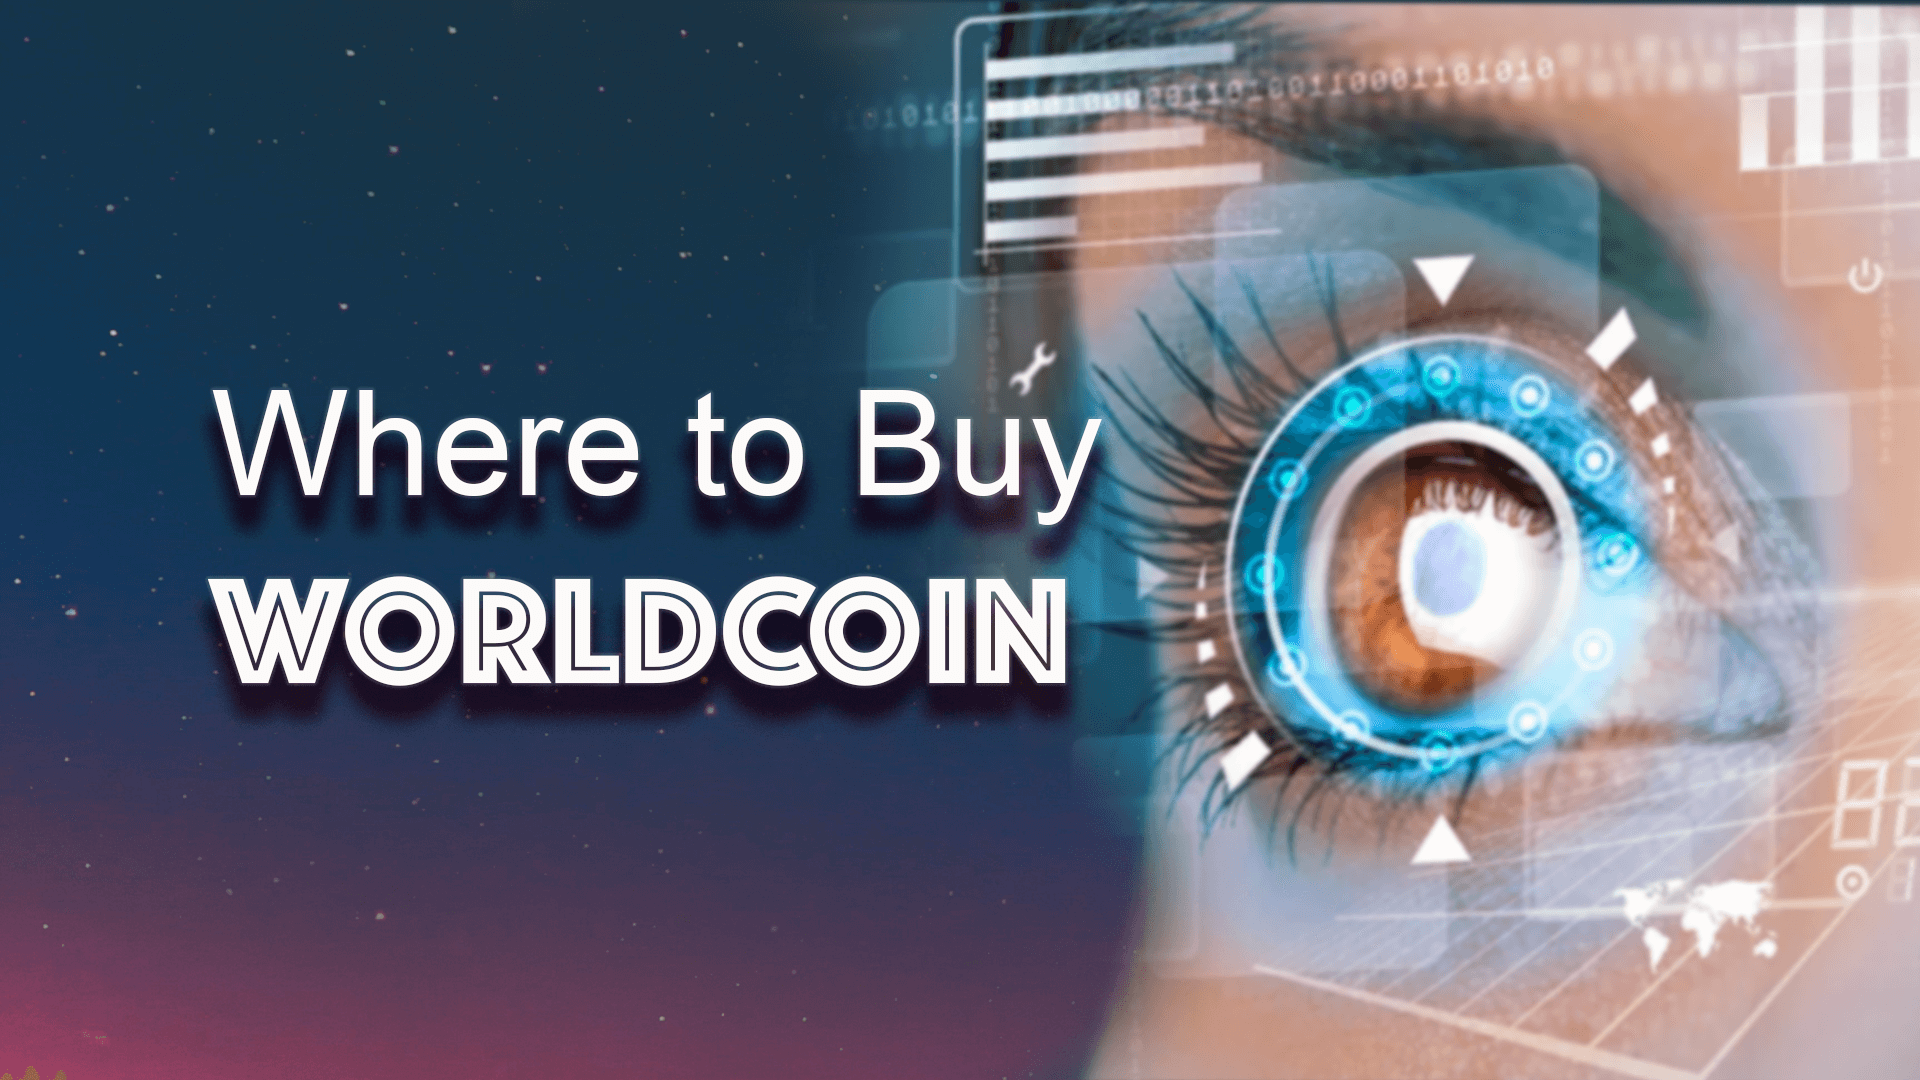 Where to buy Worldcoin featured image